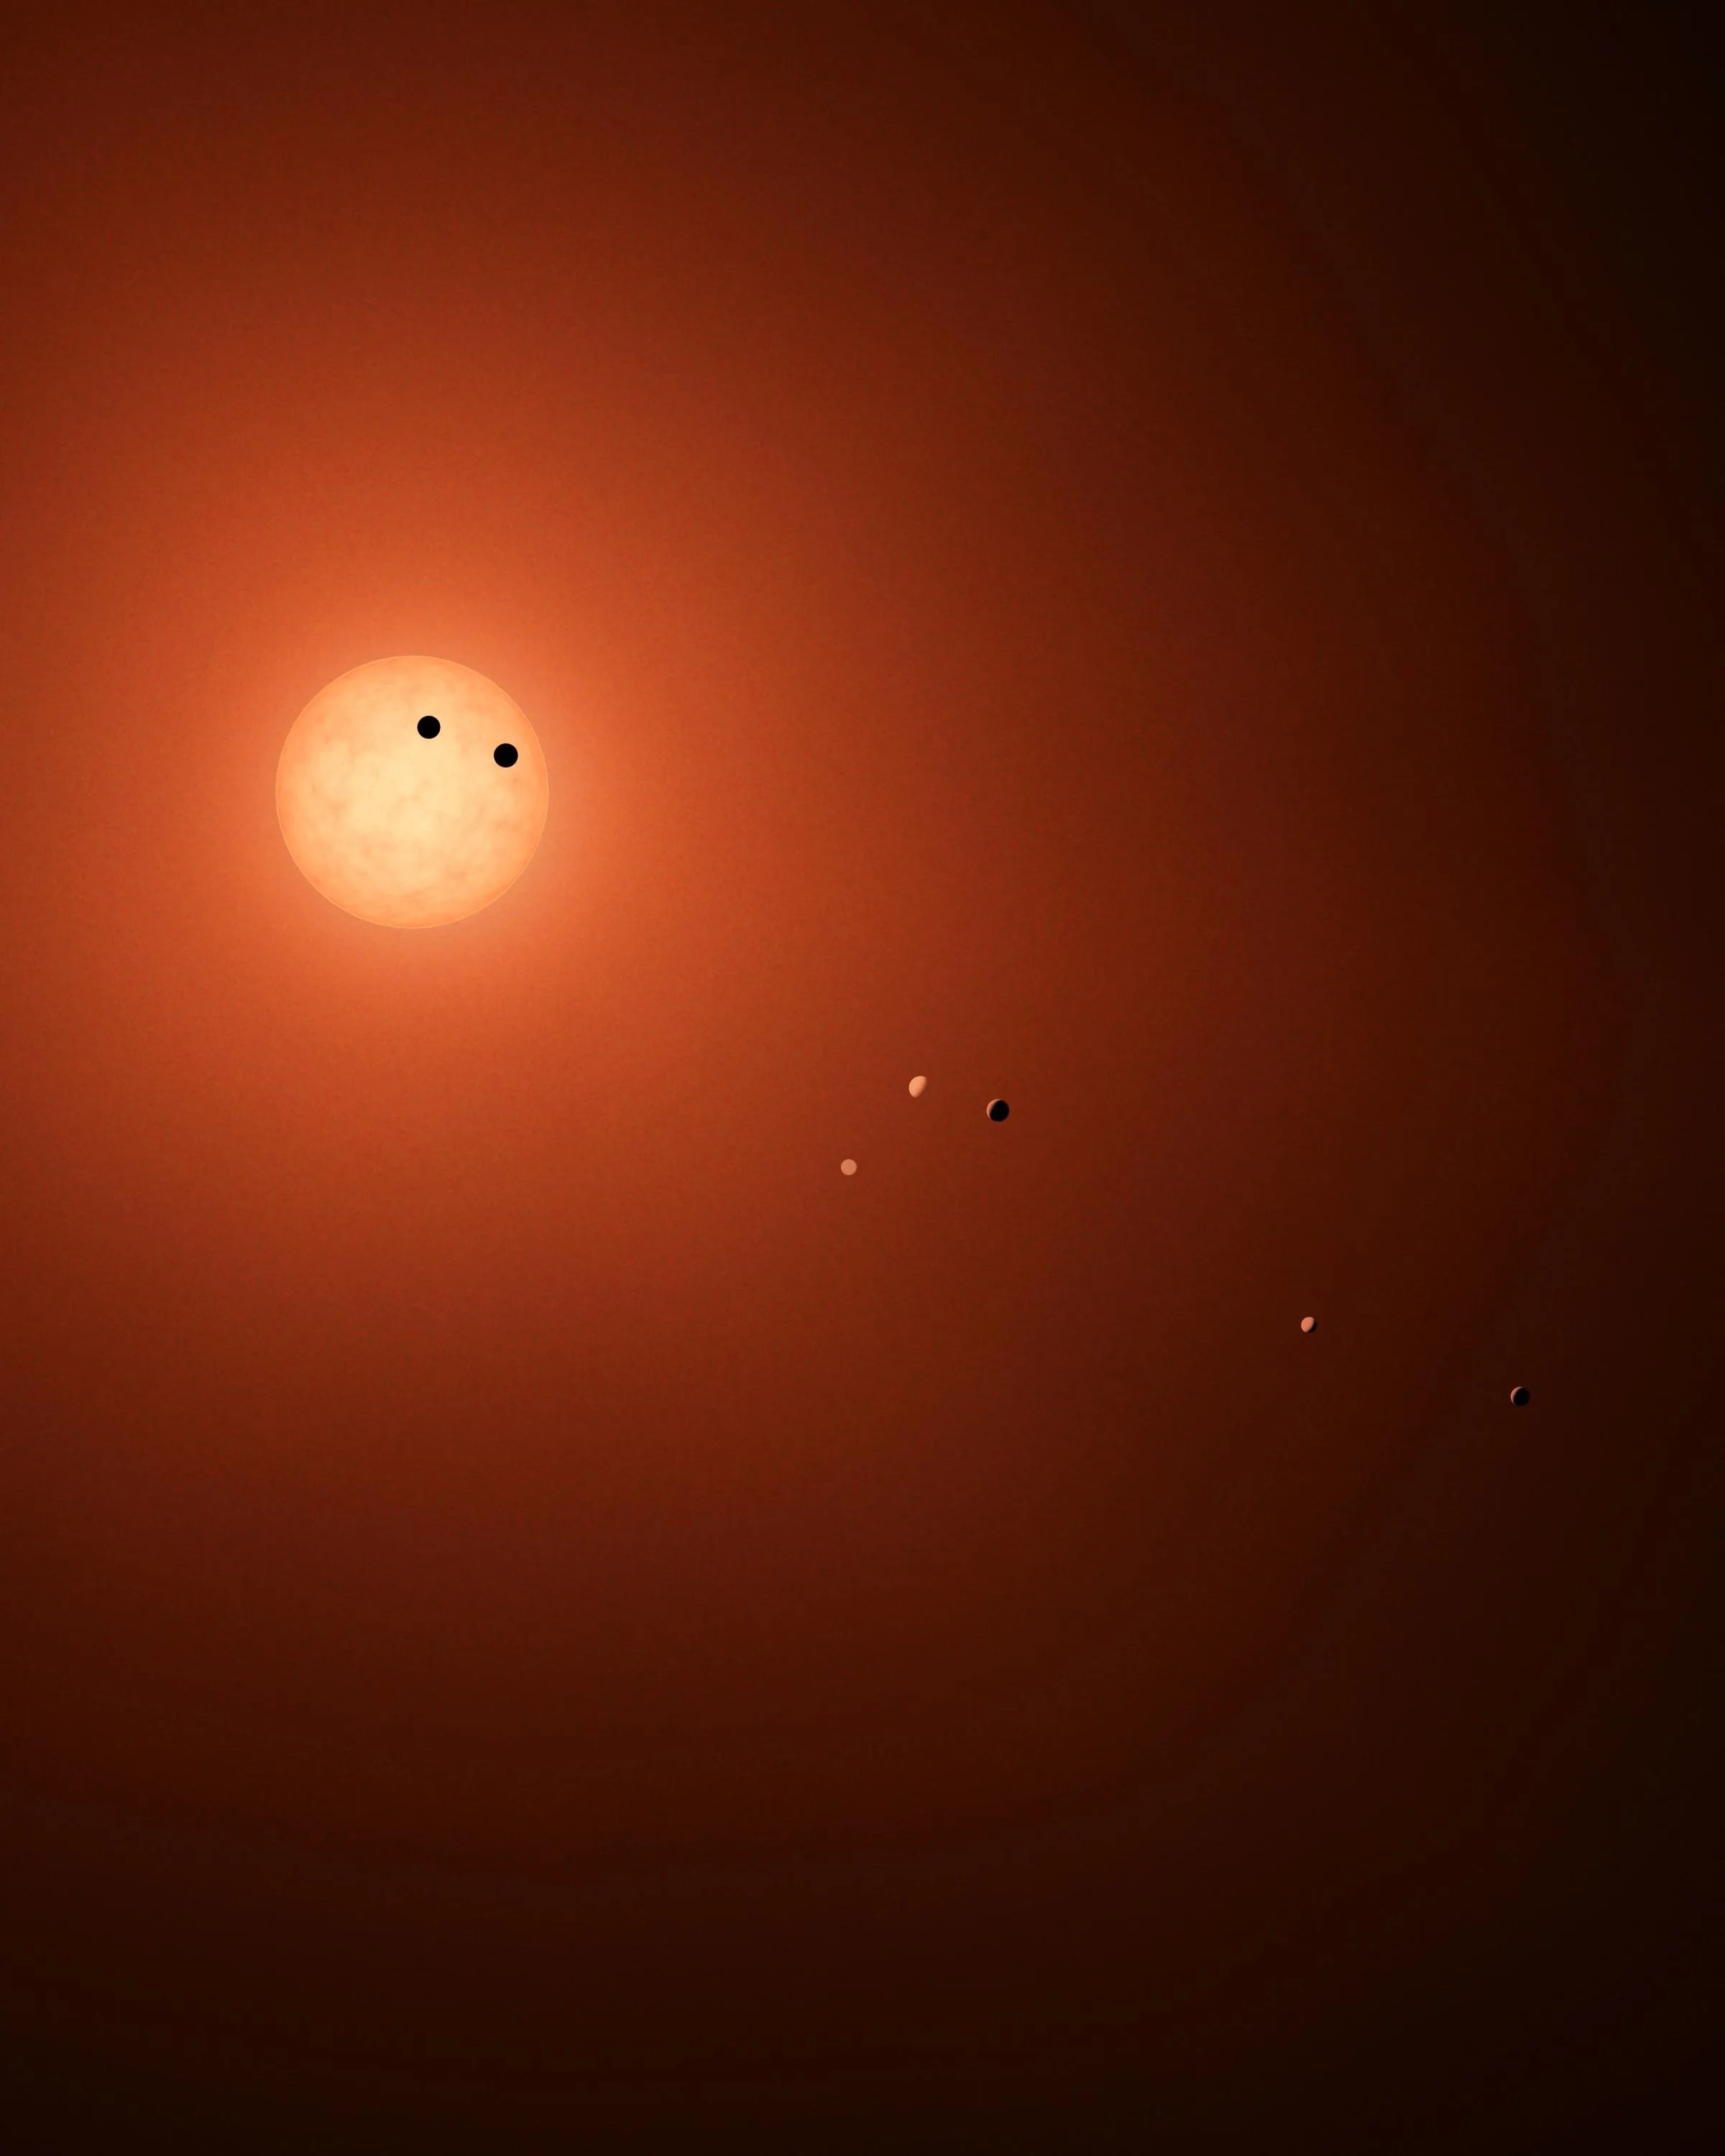 illustration shows the seven TRAPPIST-1 planets as they might look as viewed from Earth using a fictional, incredibly powerful telescope